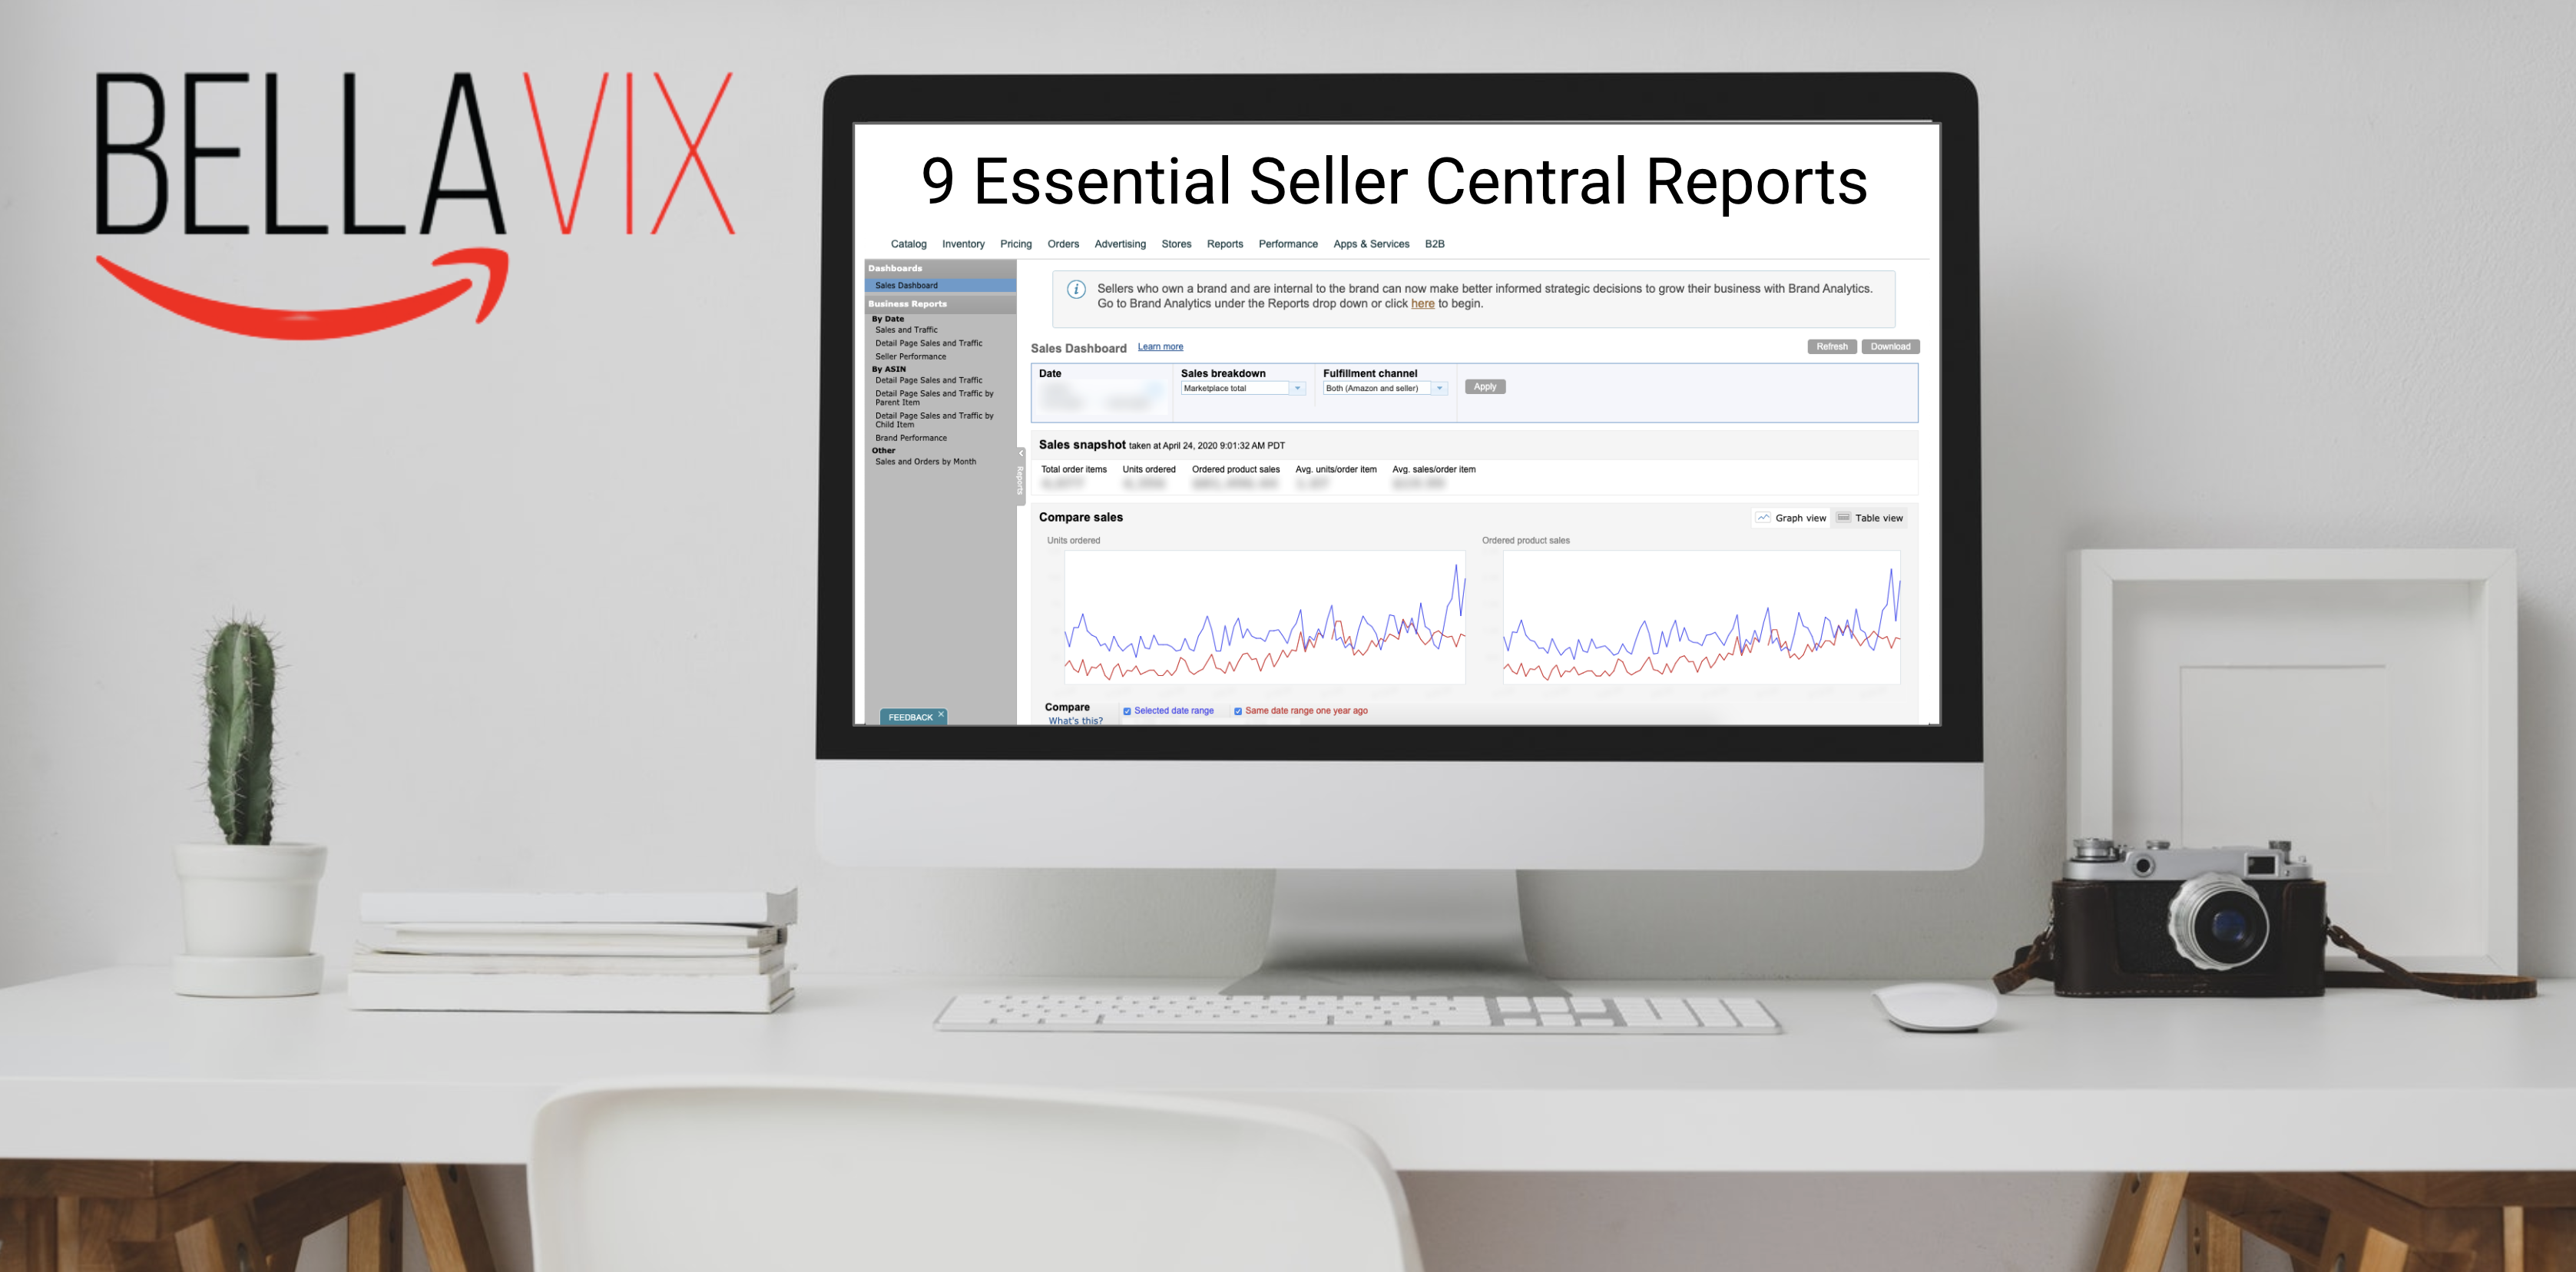 9 Essential Seller Central Reports